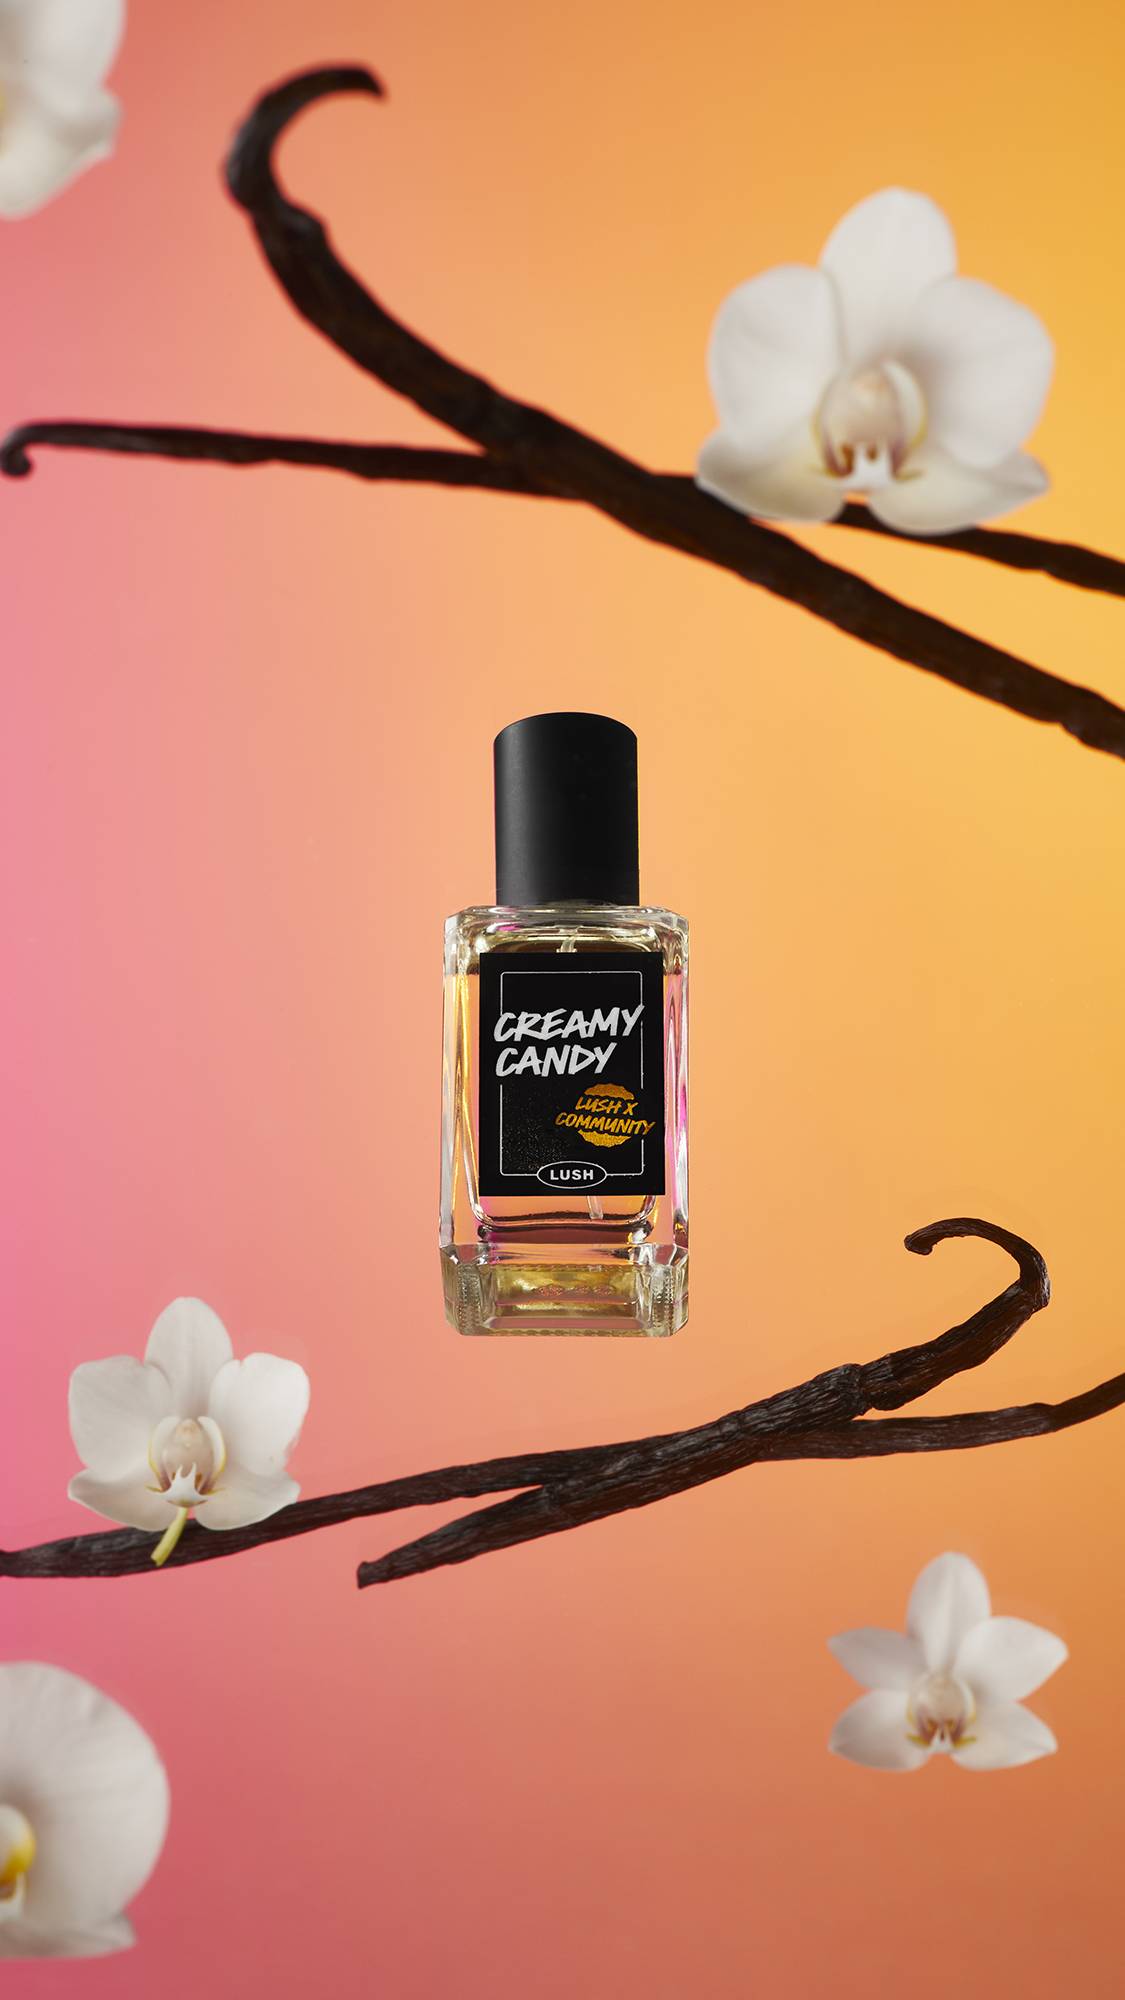 The Creamy Candy perfume bottle is in front of a pink and orange background surrounded by vanilla pods and flowers.